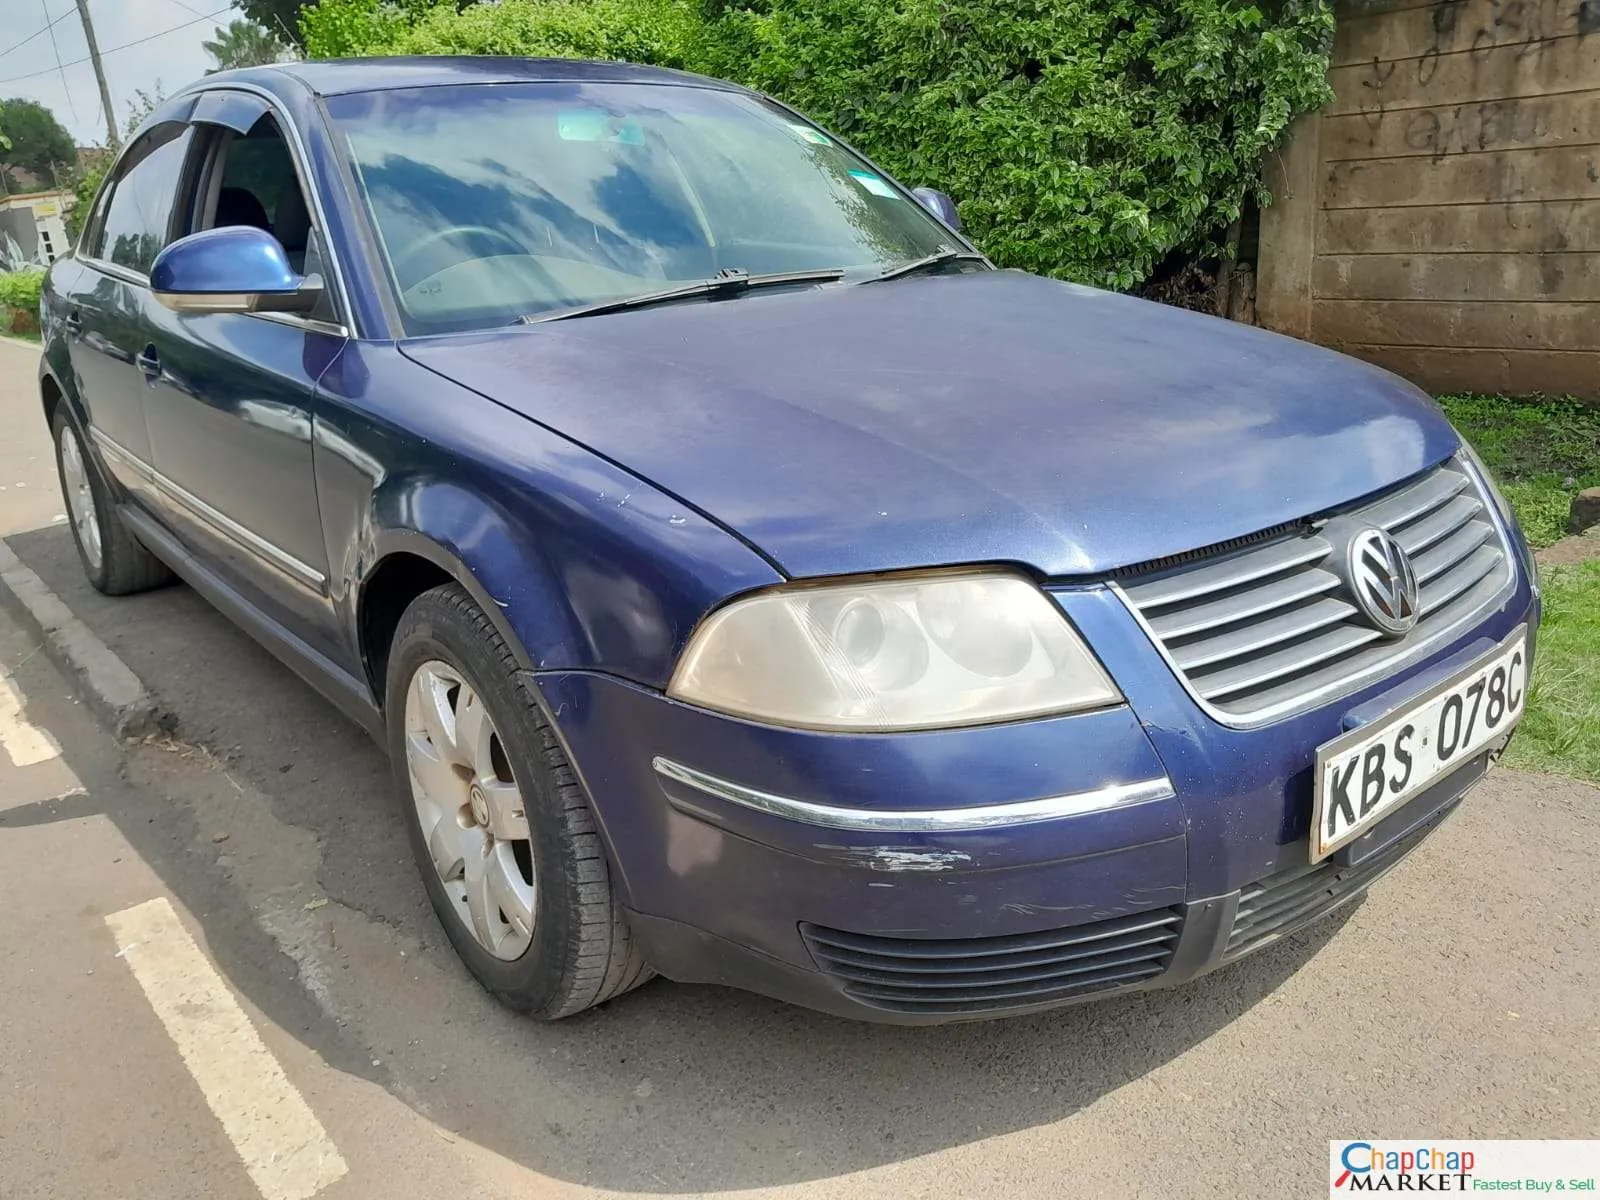 Volkswagen Passat for sale in Kenya QUICK SALE 🔥 You Pay 30% Deposit Trade in Ok EXCLUSIVE hire purchase installments bank finance Clean